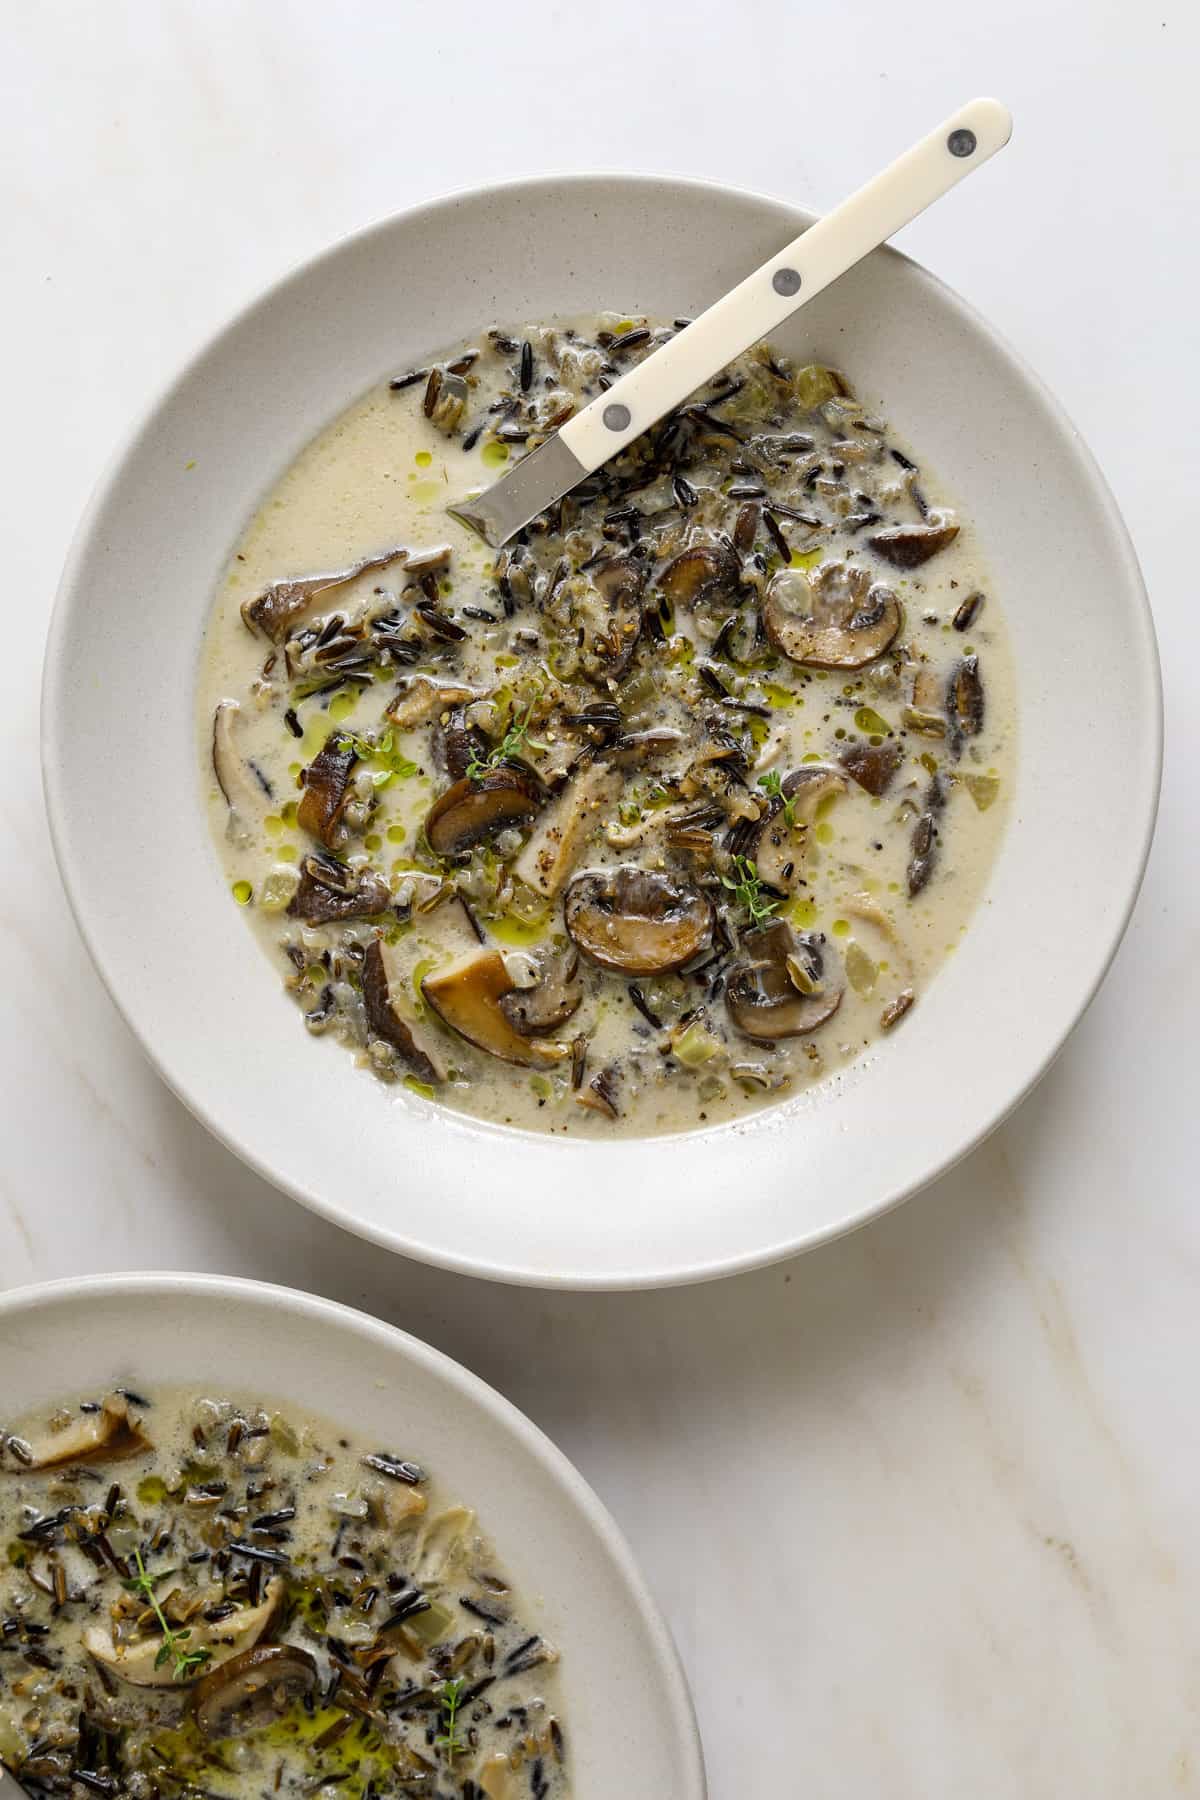 A spoon dipping into a bowl of wild rice soup.